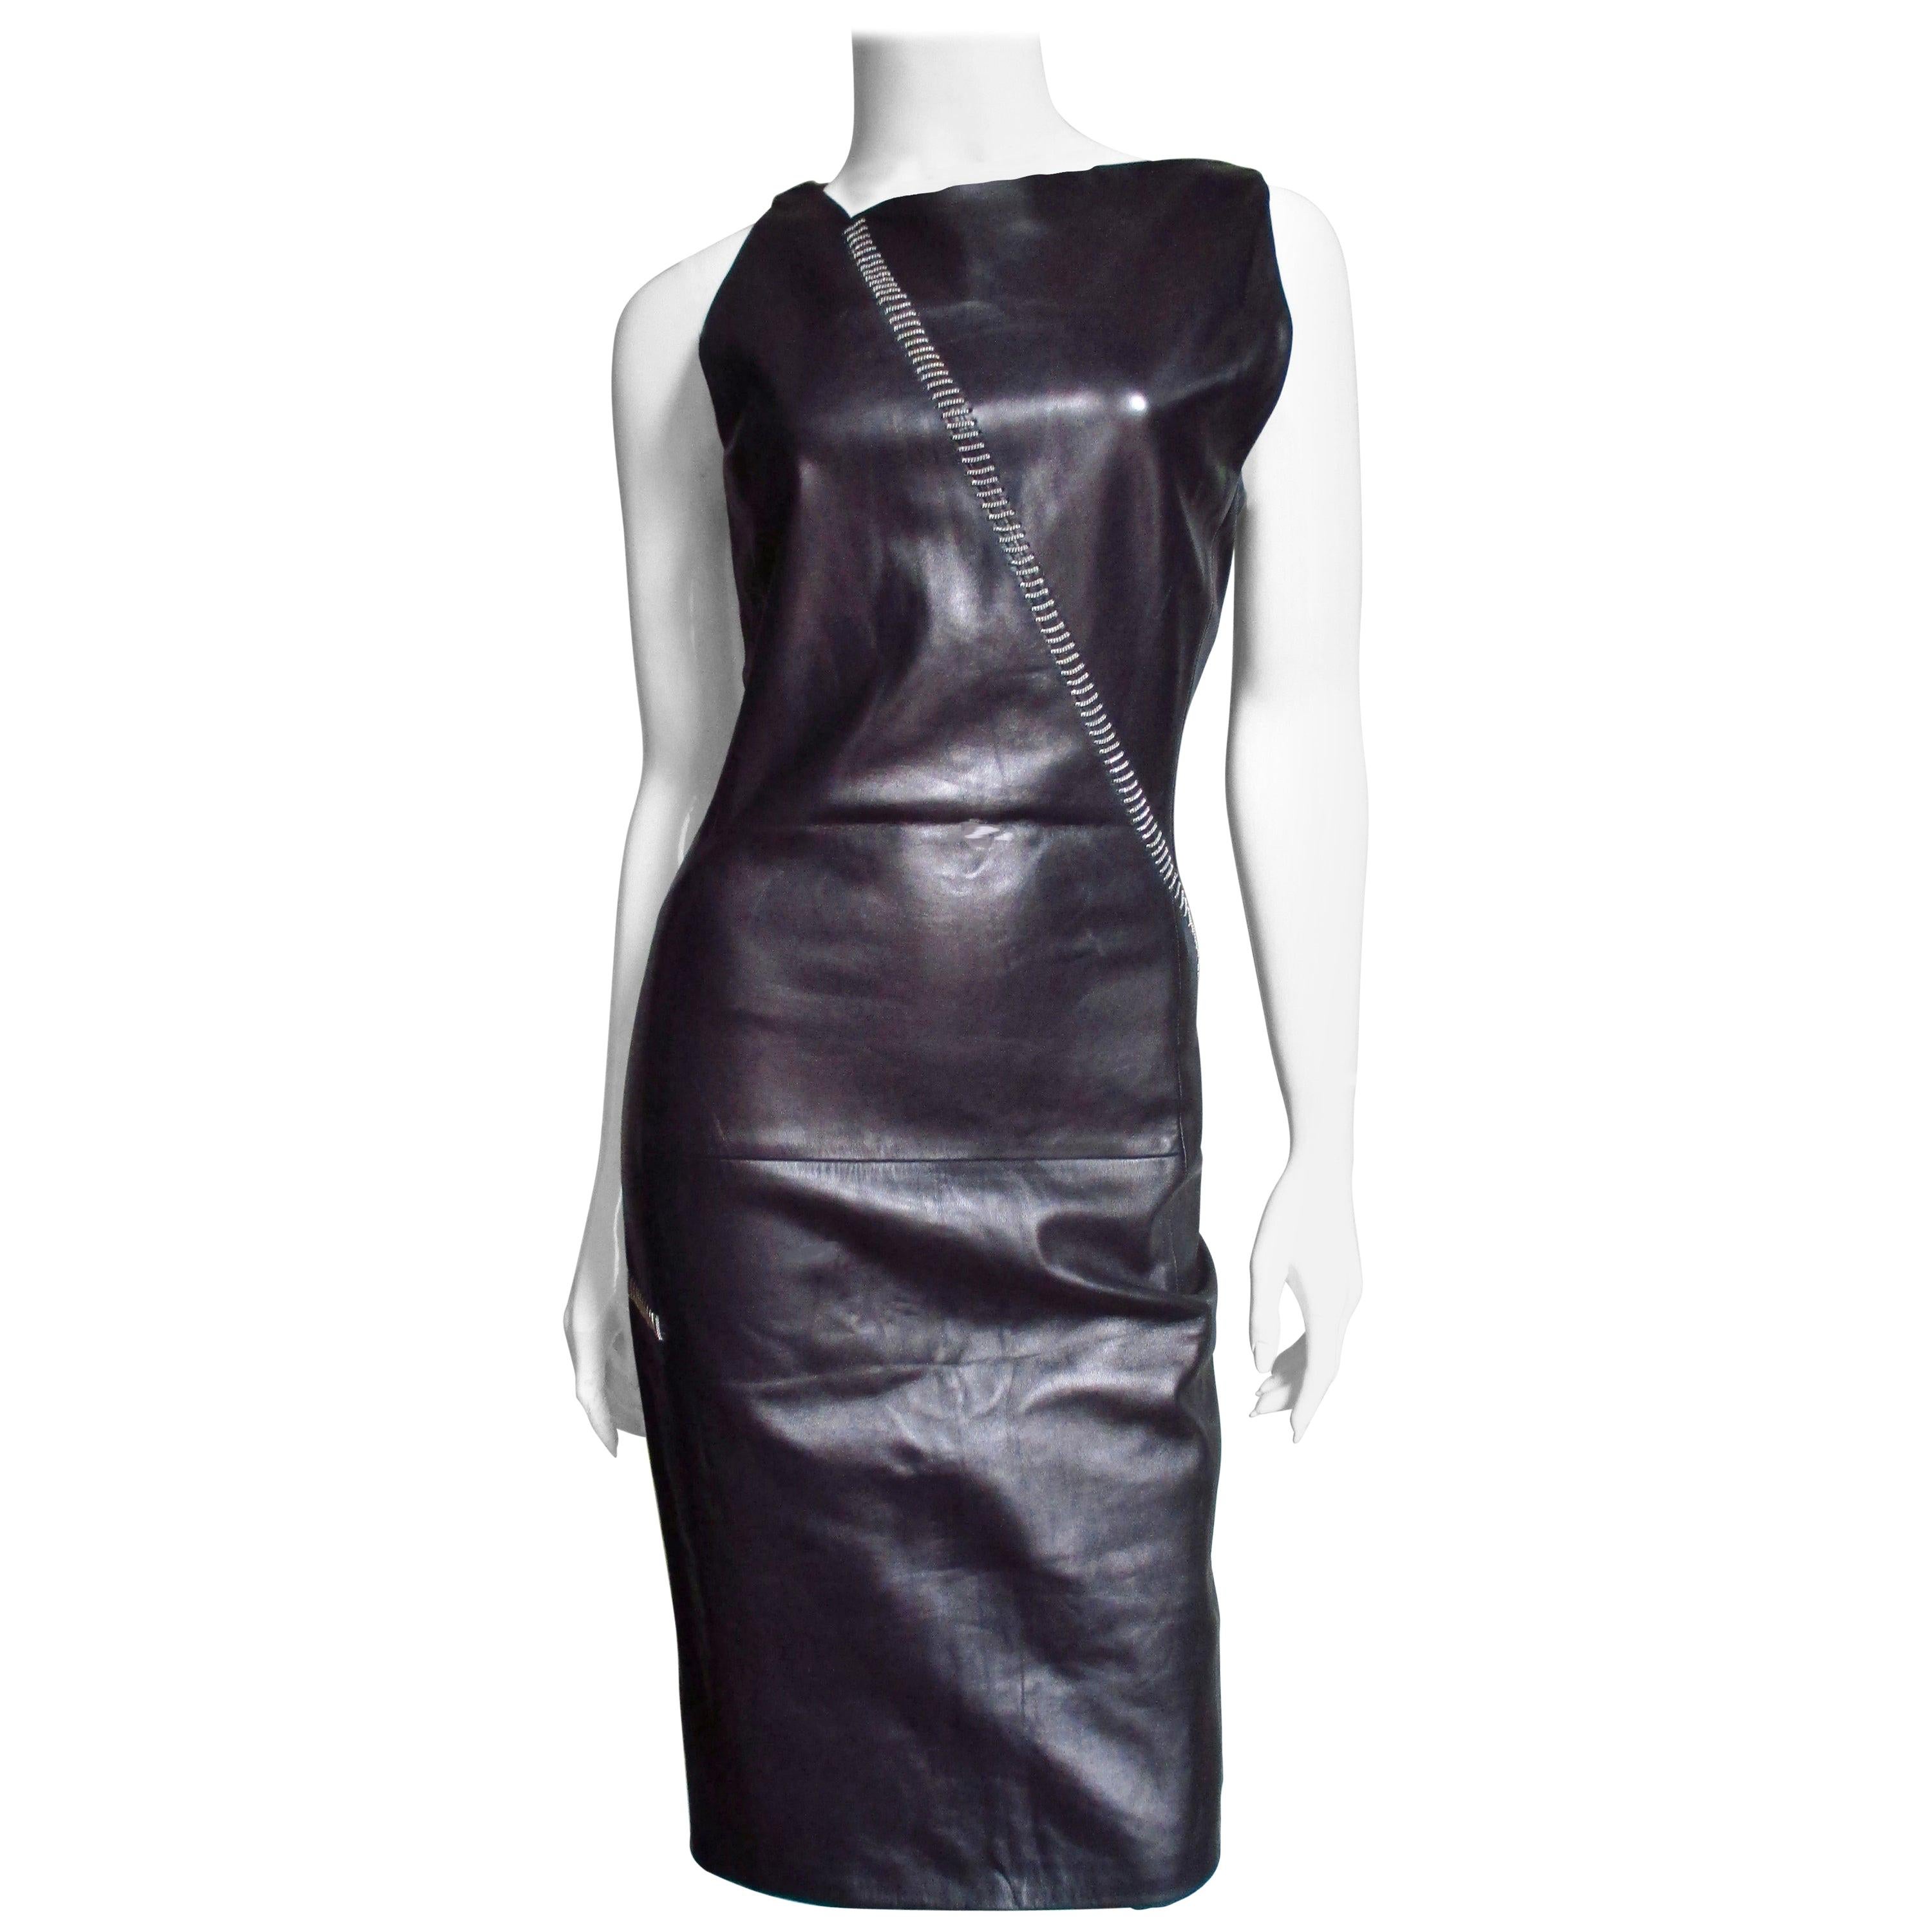 Gianni Versace New Leather Dress with Chain Trim